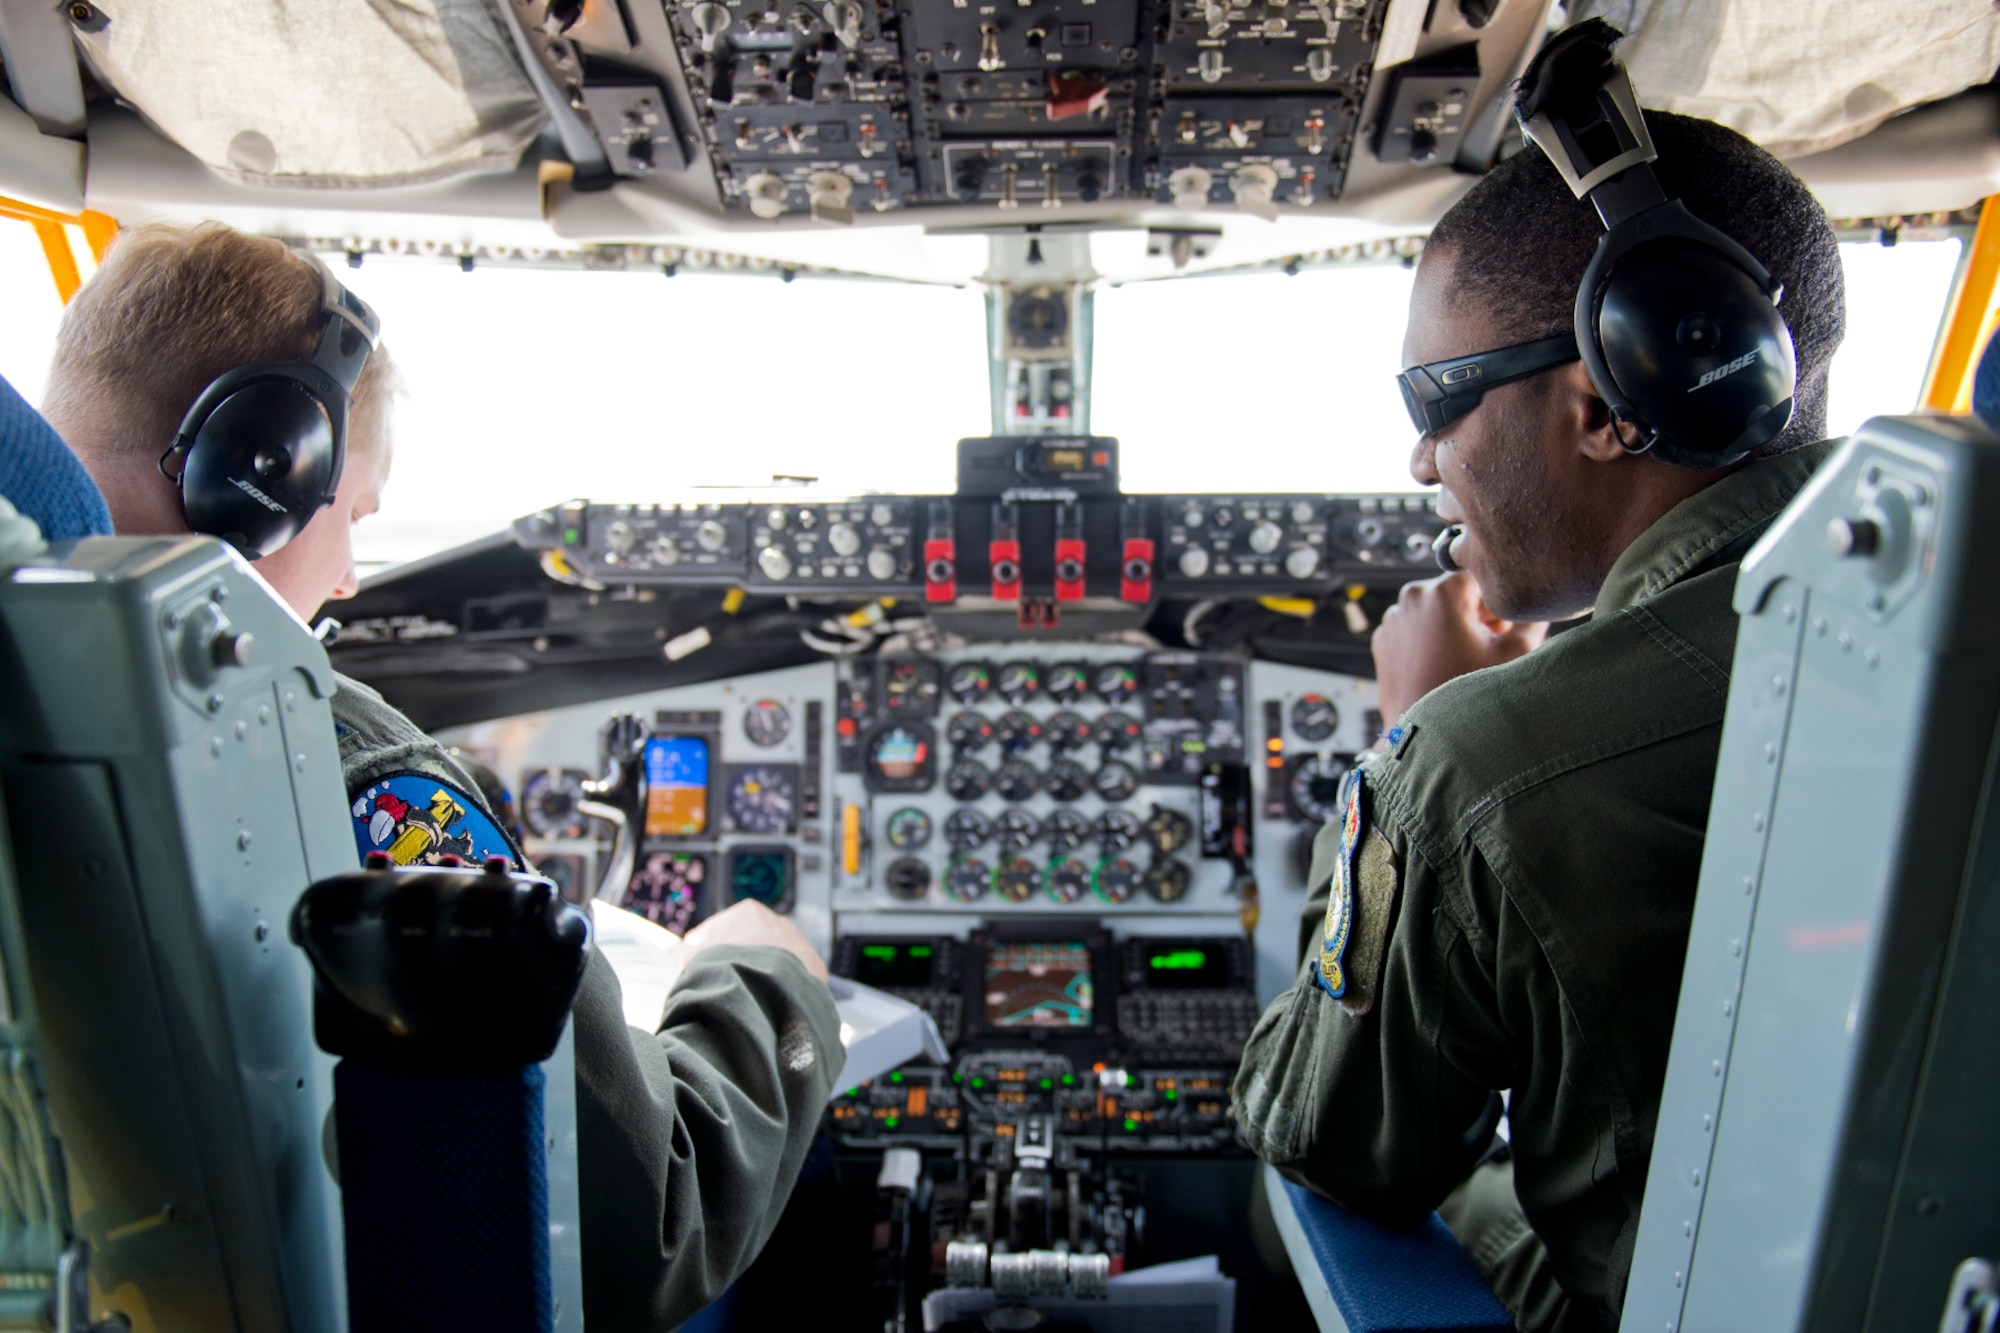 Capt. Norman Popp (left) and 1st Lt. Zico Bruce, 100th Air Refueling Wing KC-135 Stratotanker pilots, prepare for take off before a refueling mission over the Baltic Sea during Baltic Operations 2016, June 9, 2016, Powidz Air Base, Poland. (U.S. Air Force photo/Senior Airman Erin Babis)
In its 44th year, BALTOPS 16 is a multinational maritime exercise taking place in Estonia, Finland, Germany, Poland, Sweden and throughout the Baltic Sea. (U.S. Air Force photo/Senior Airman Erin Babis)